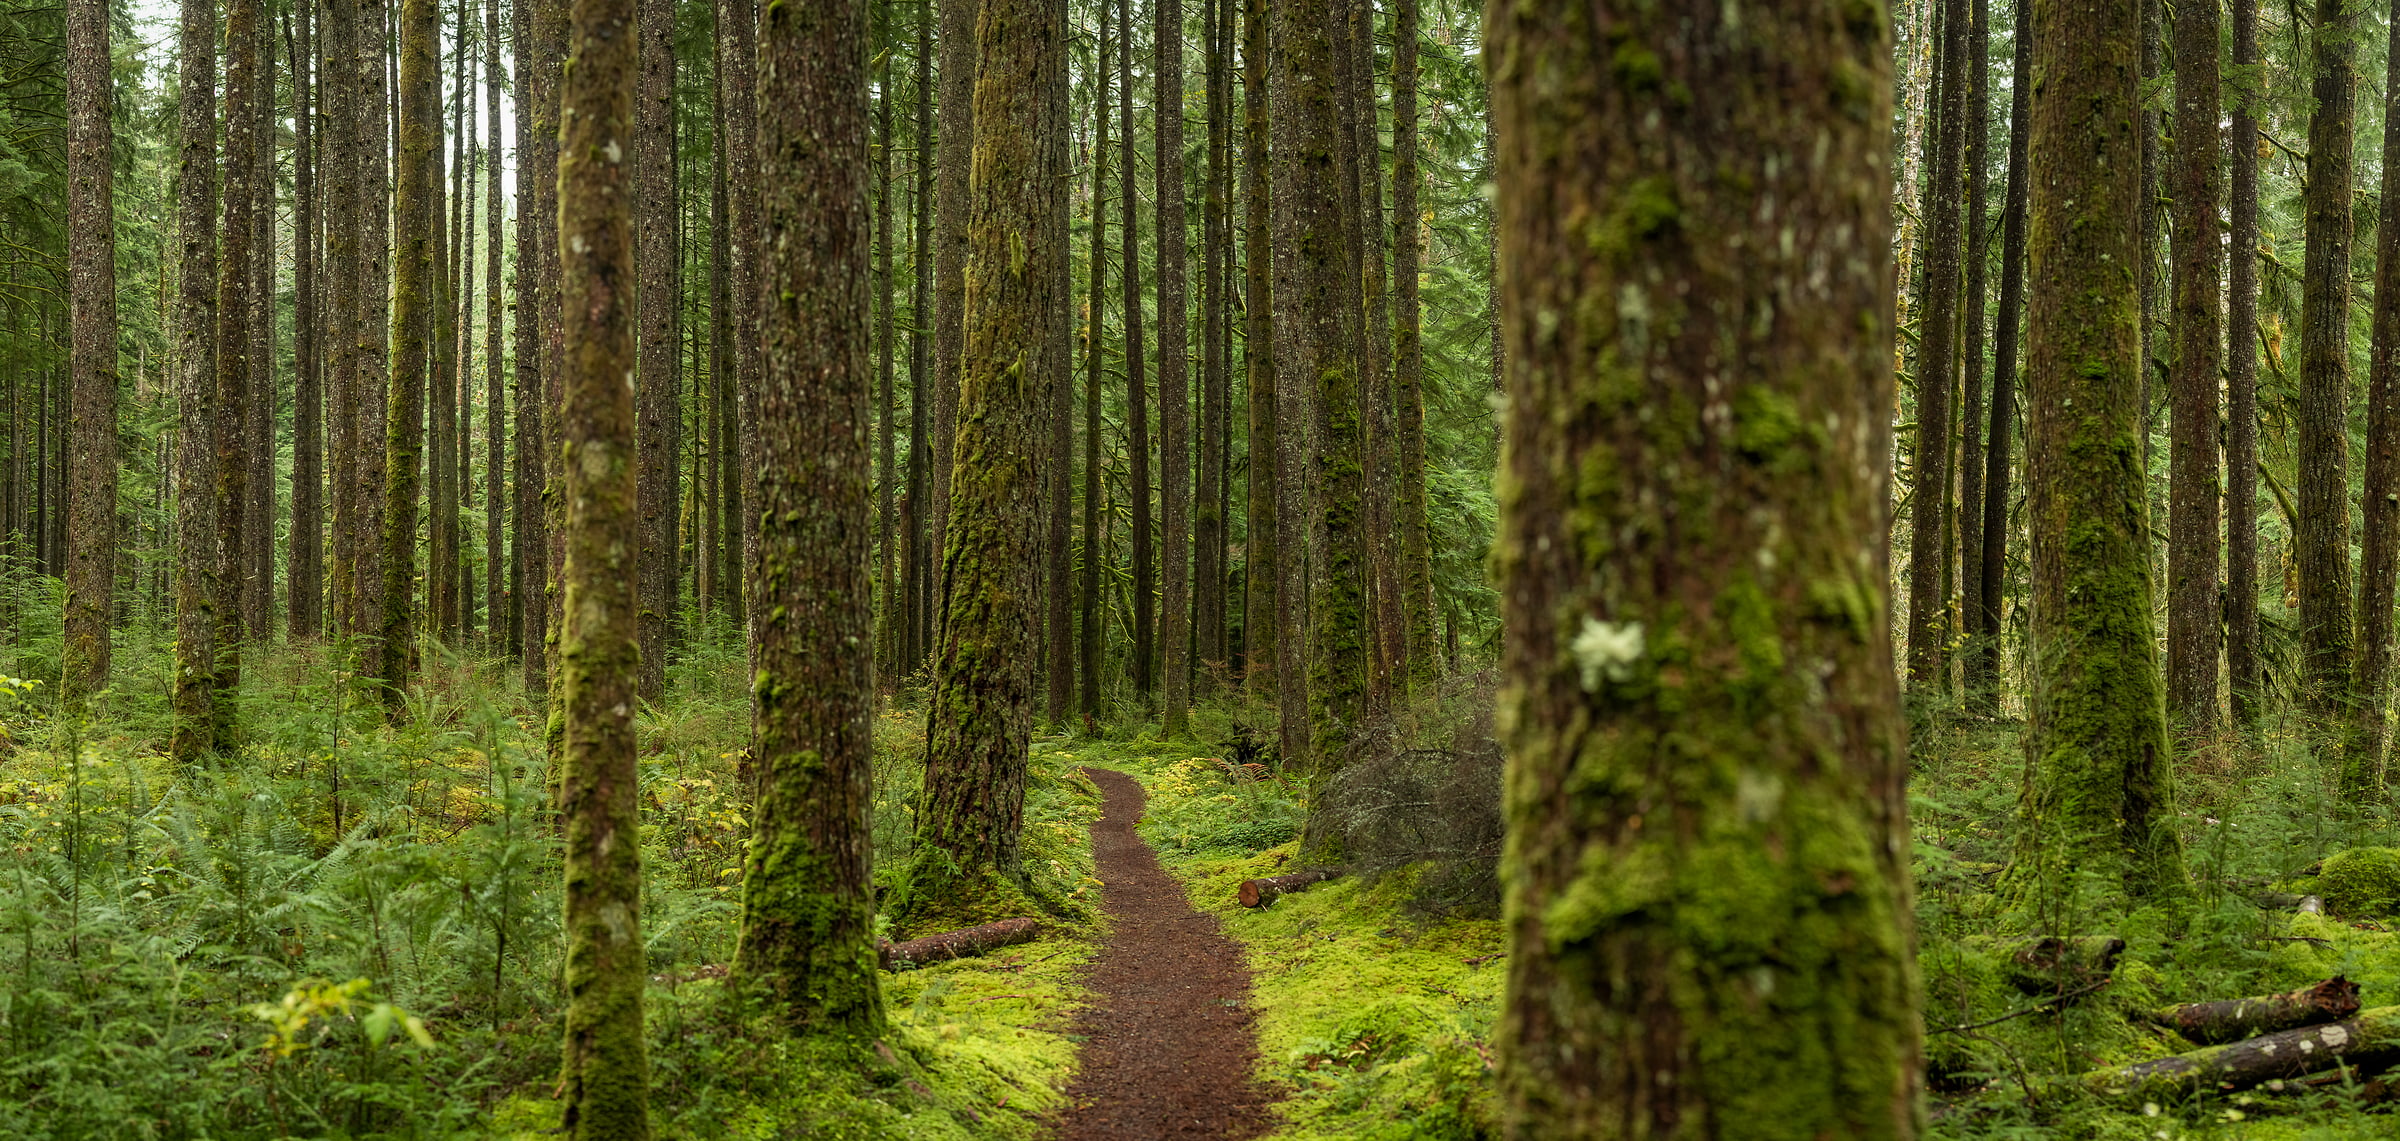 217 megapixels! A very high resolution, large-format VAST photo print of a pathway in a forest; nature photograph created by Scott Rinckenberger in CCC Trail, Middle Fork Trailhead, Middle Fork Snoqualmie River, Washington